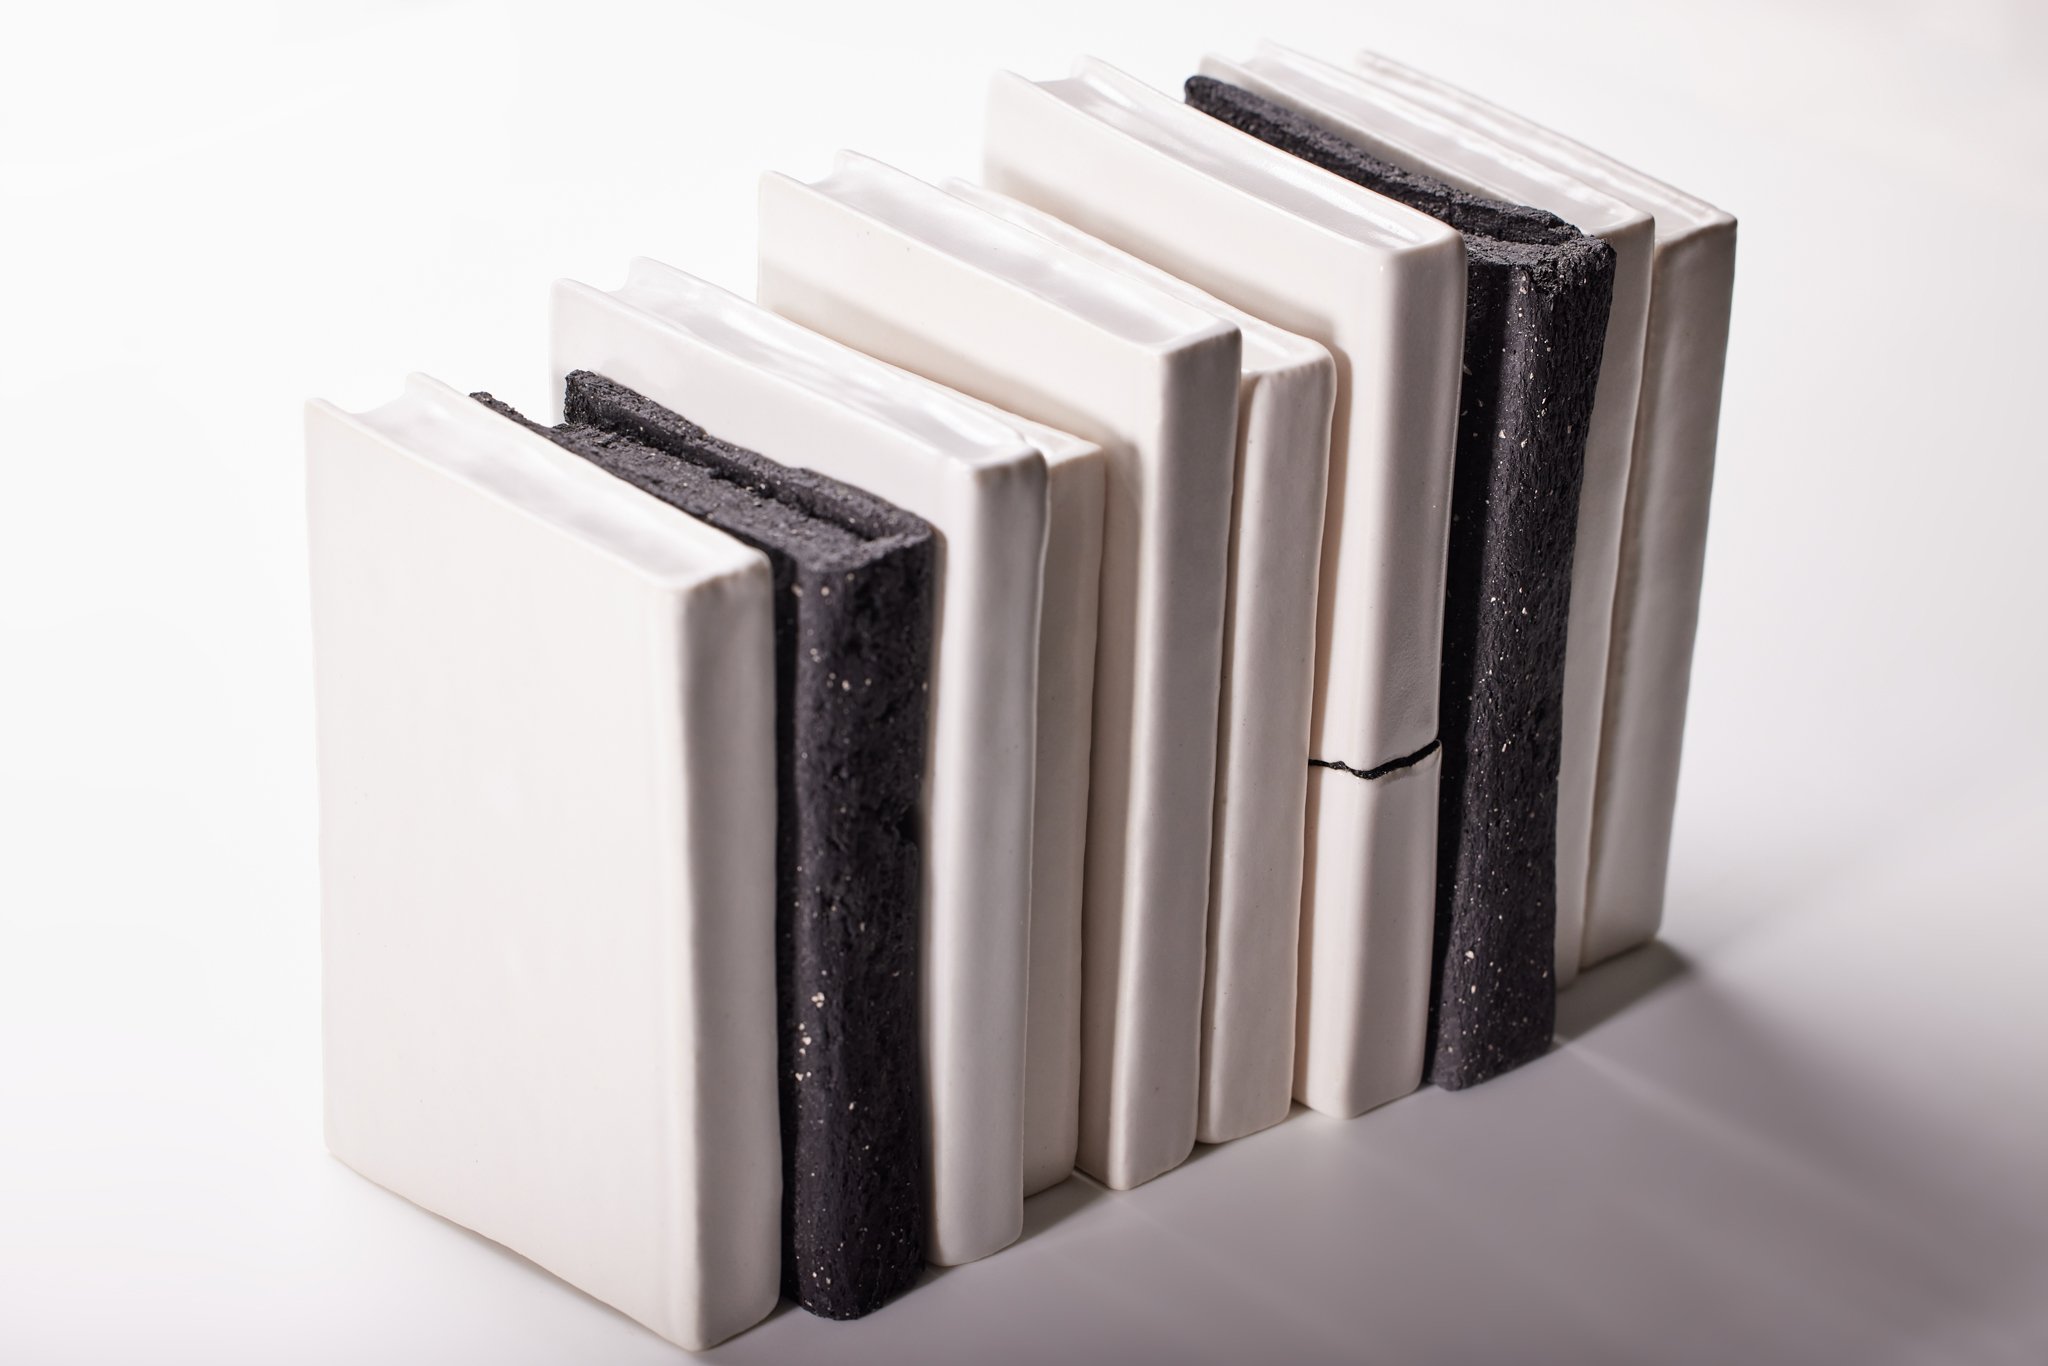 Where They Burn Books (photo 4), Dan Elborne 2021. Porcelain, glaze, paper ash & gold lustre. Photo by Aaron Mcauley. Courtesy of the artist and Onespace Gallery Brisbane.jpg